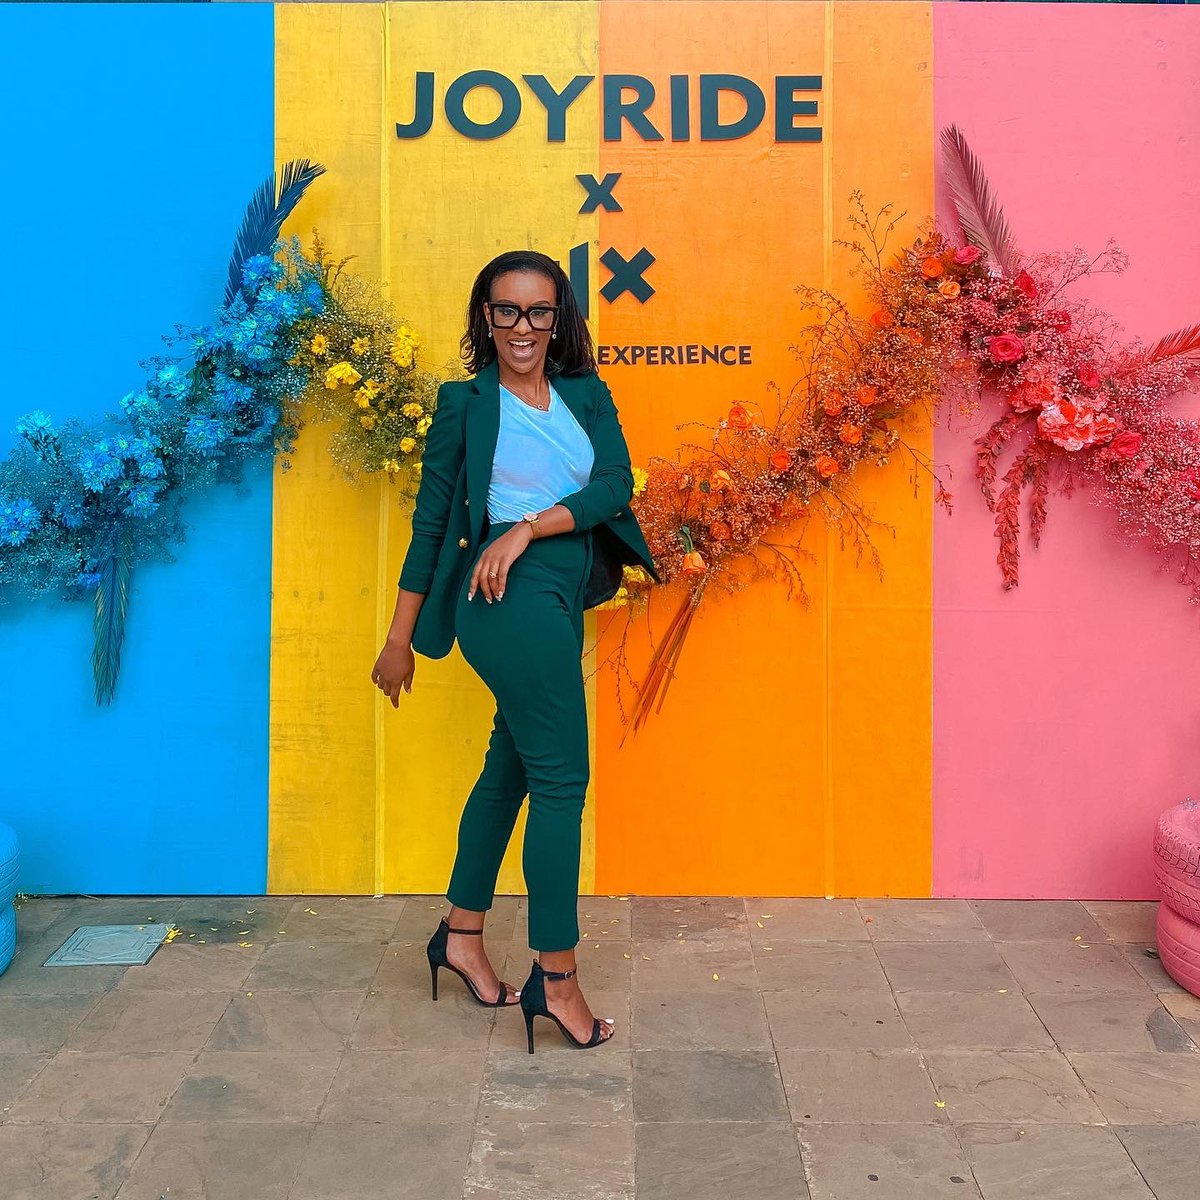 Got to MC the Joyride live experience  today and it was such a thrill. 
#BlessedLittleGirl 
#MsUnderstood 
#HostWithTheMost